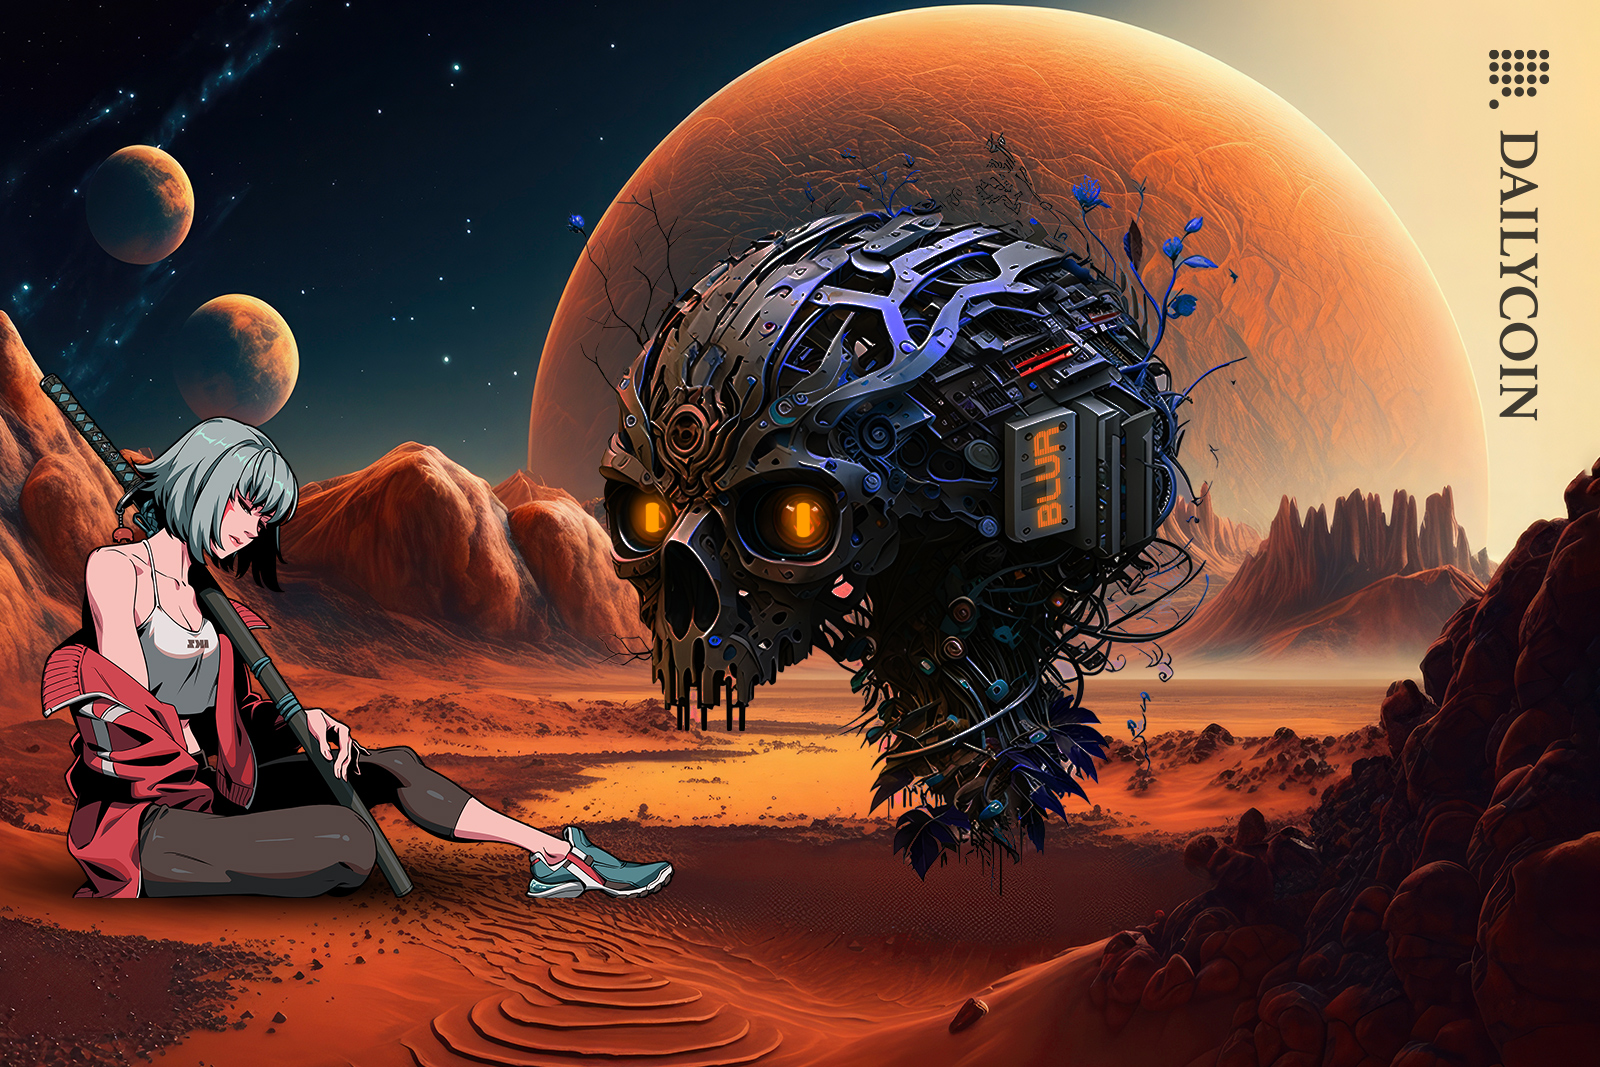 Mars planet illustration with a huge robot tech skull looking at Azuki NFT sitting on the ground disappointed.